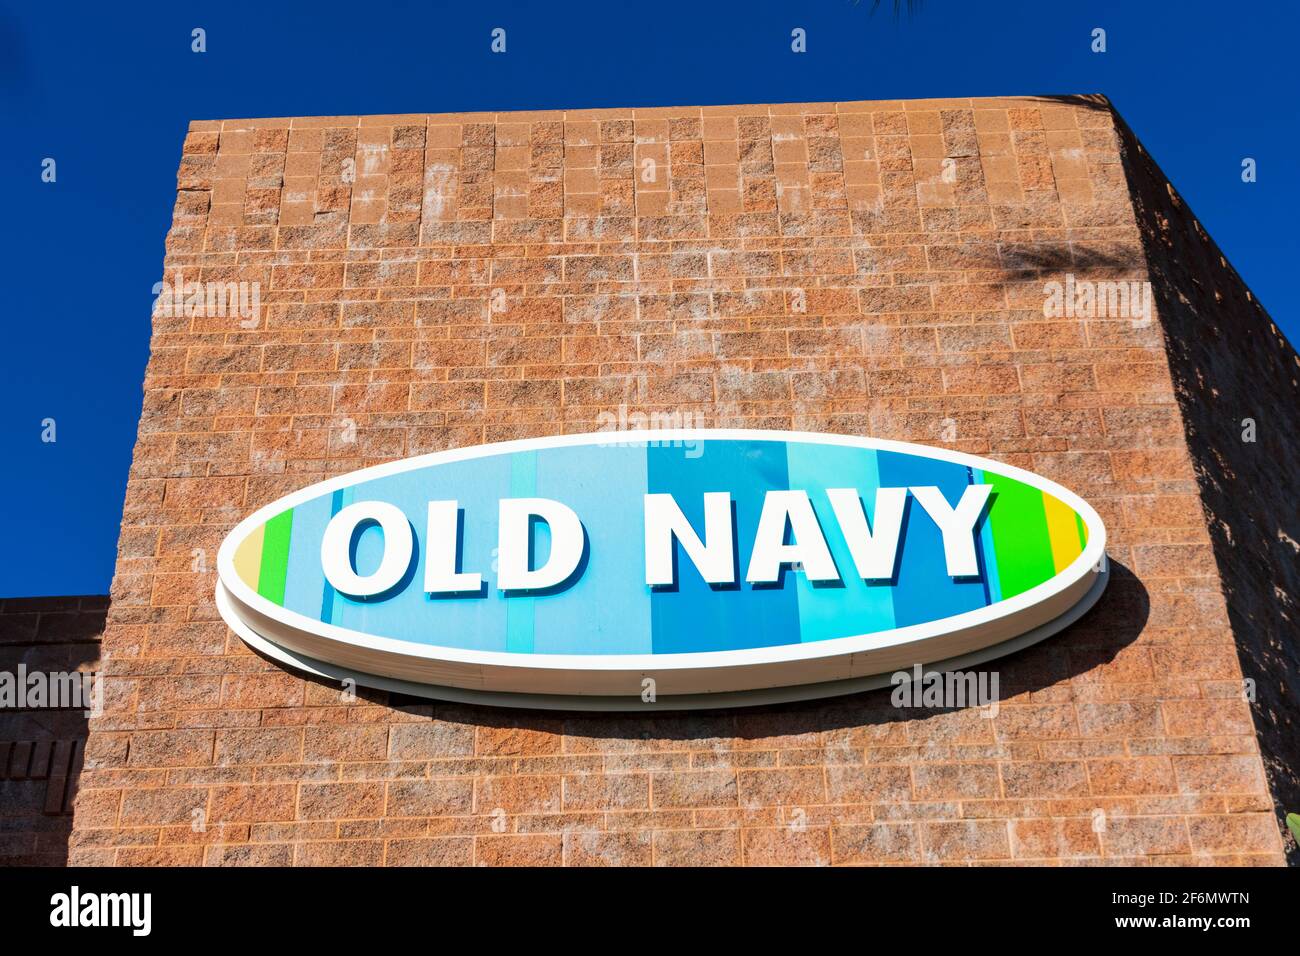 Old Navy logo and sign on chain store facade. Old Navy is an American clothing and accessories retailing company - Irvine, California, USA - 2020 Stock Photo